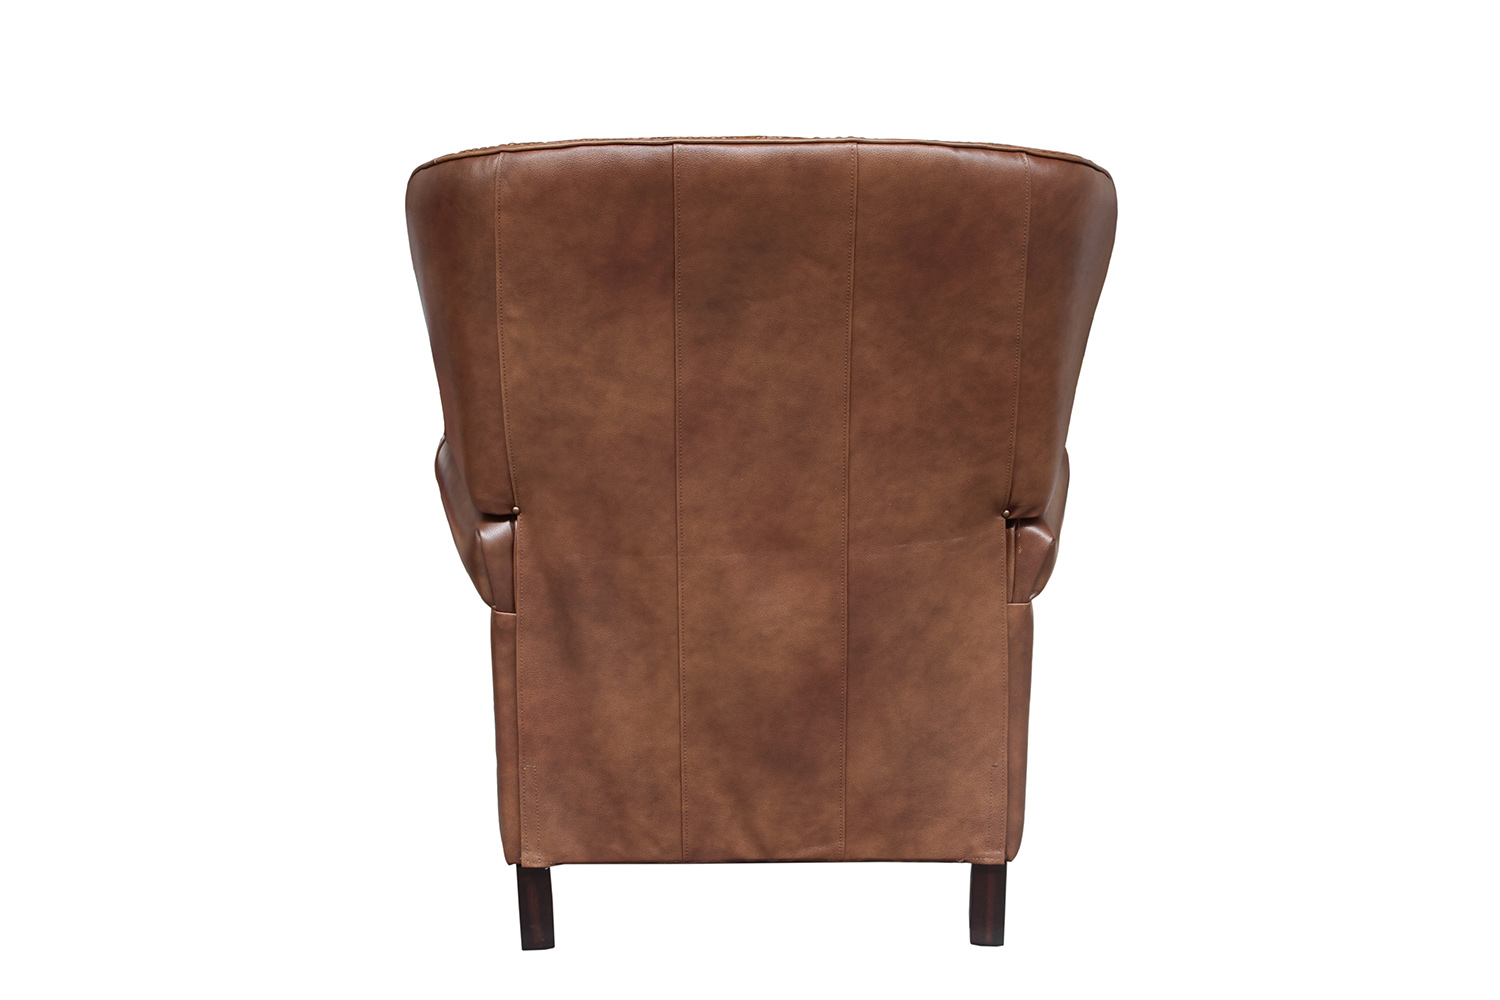 Barcalounger Presidential Recliner Chair - Wenlock Tawny/All Leather